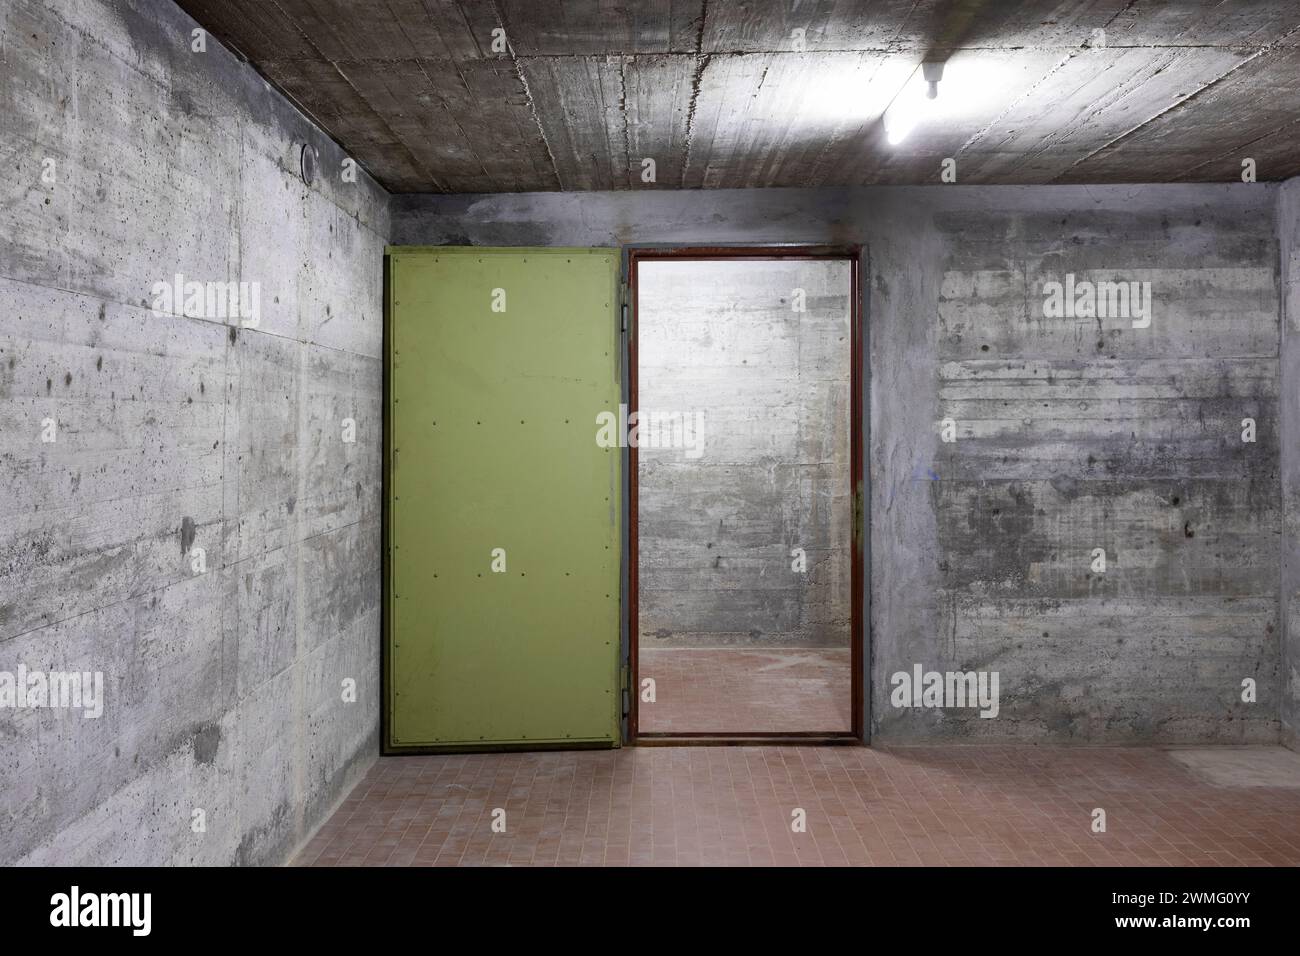 Front view of reinforced concrete wall of a bunker with open vault armored door. Scene illuminated by a white neon lamp. Nobody inside Stock Photo